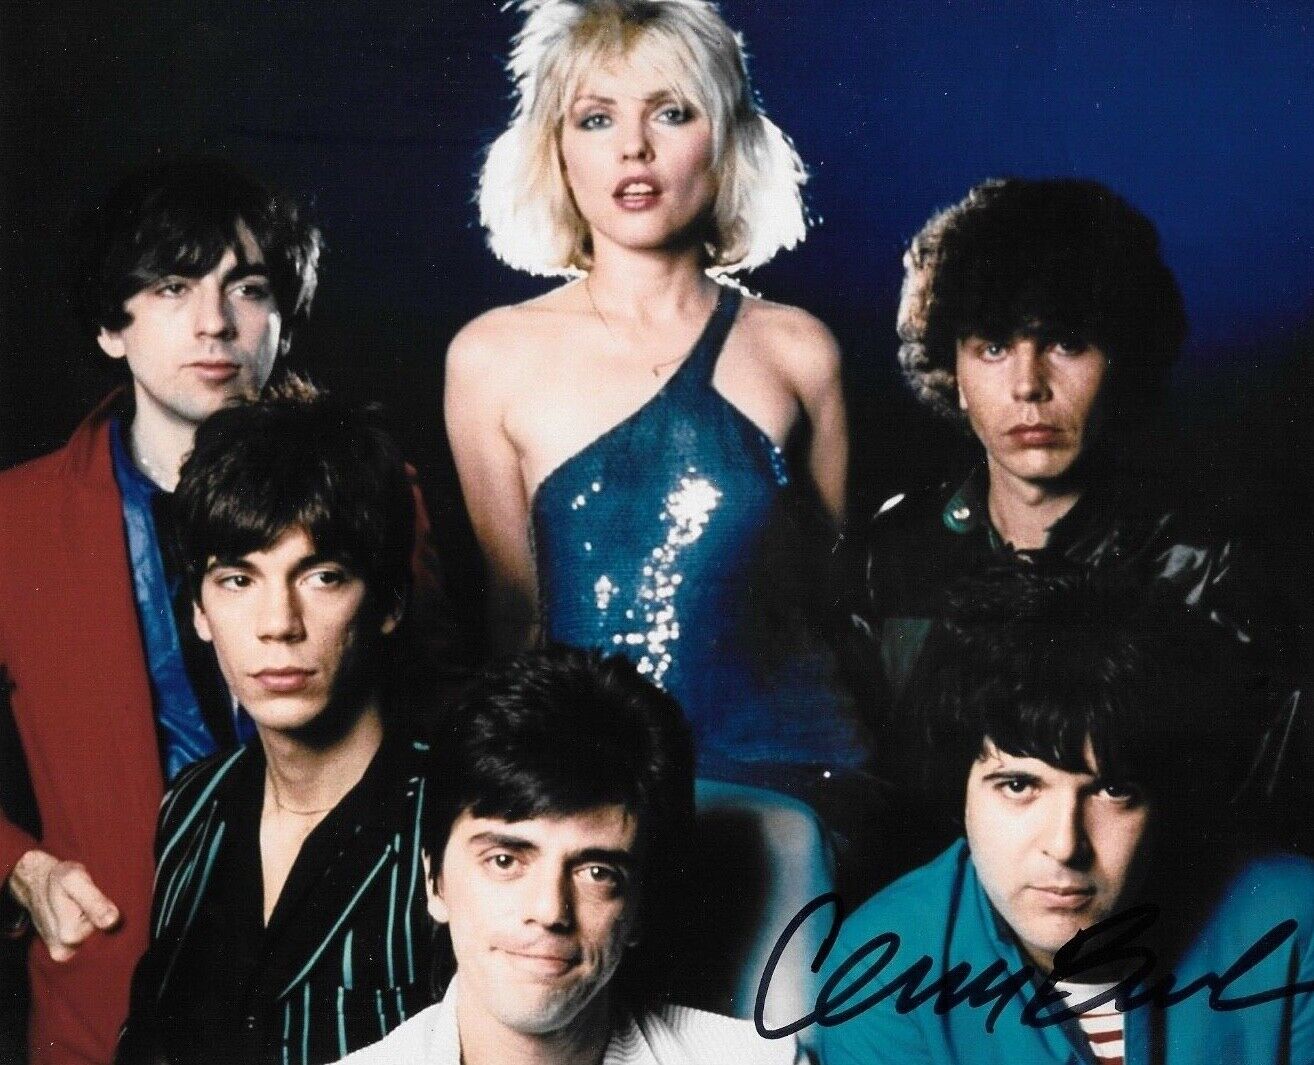 * CLEM BURKE * signed 8x10 Photo Poster painting * BLONDIE DRUMMER * COA * 7